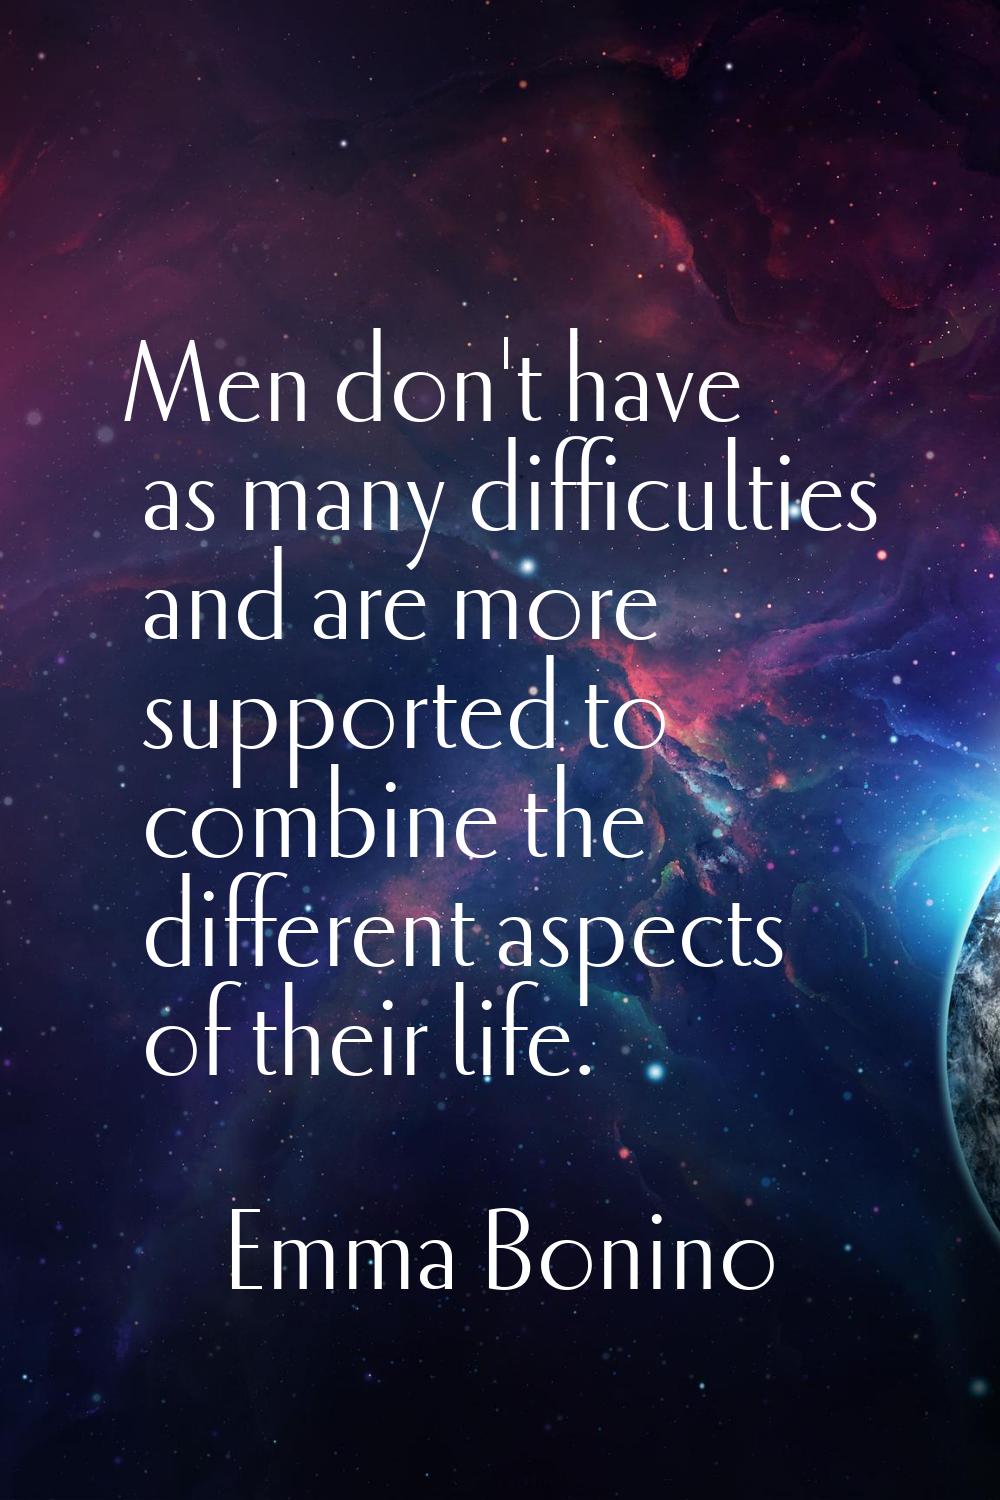 Men don't have as many difficulties and are more supported to combine the different aspects of thei